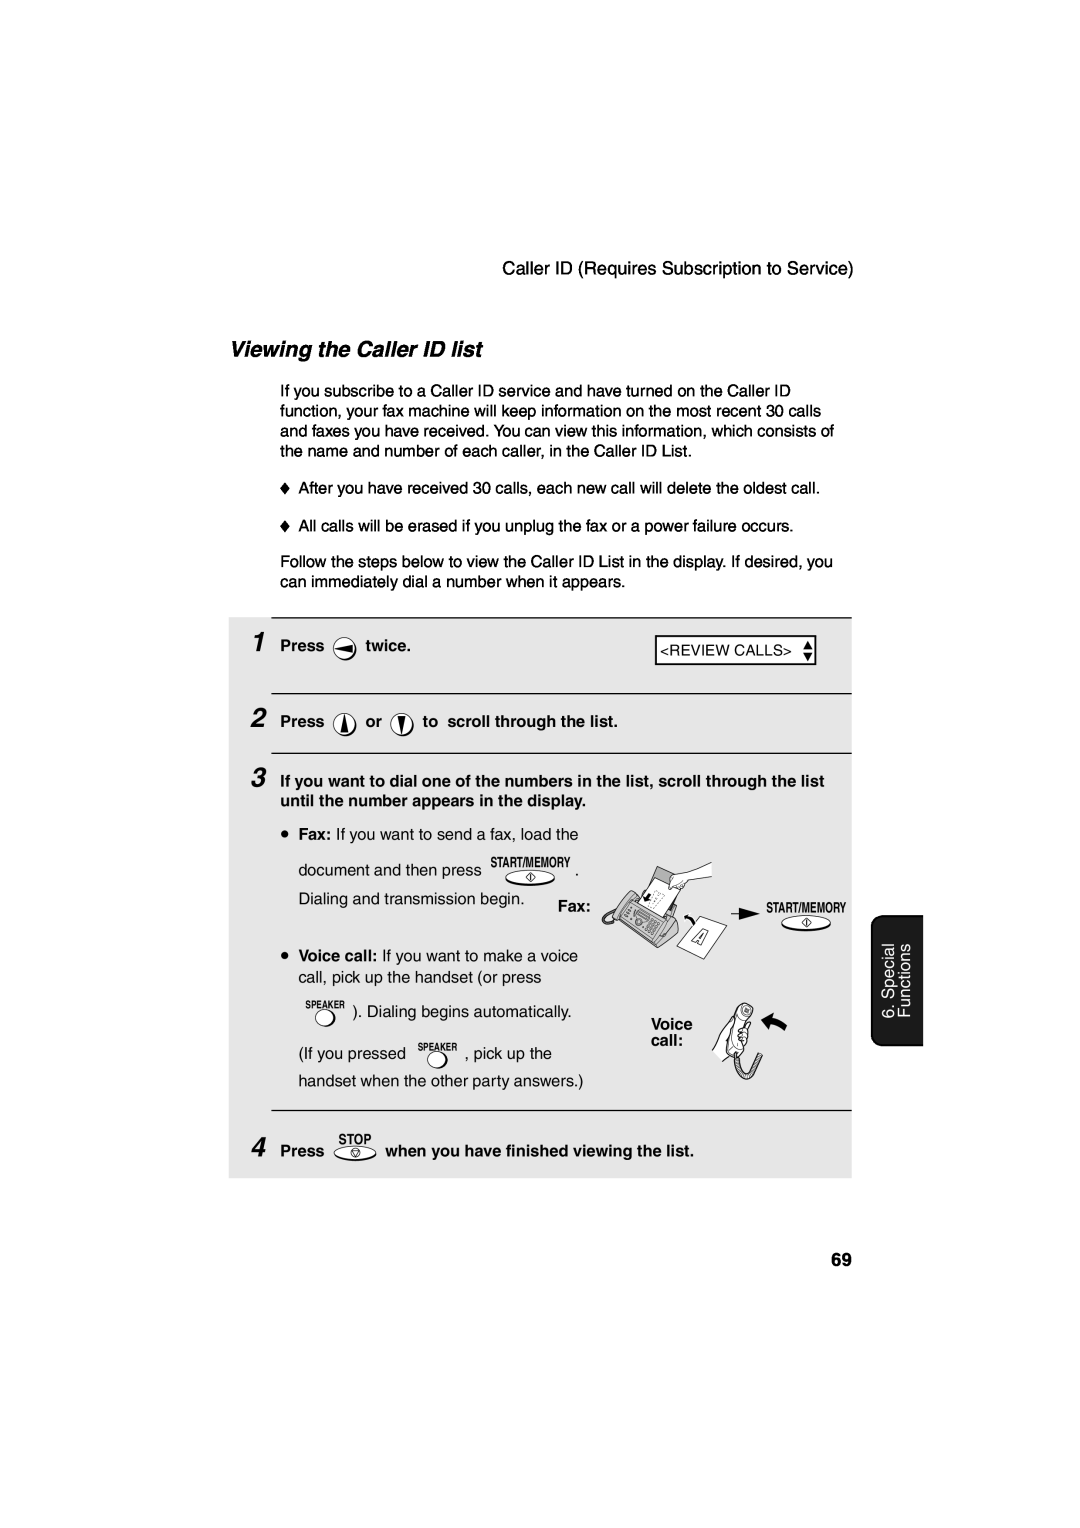 Sharp UX-A260 manual Viewing the Caller ID list, Special Functions 